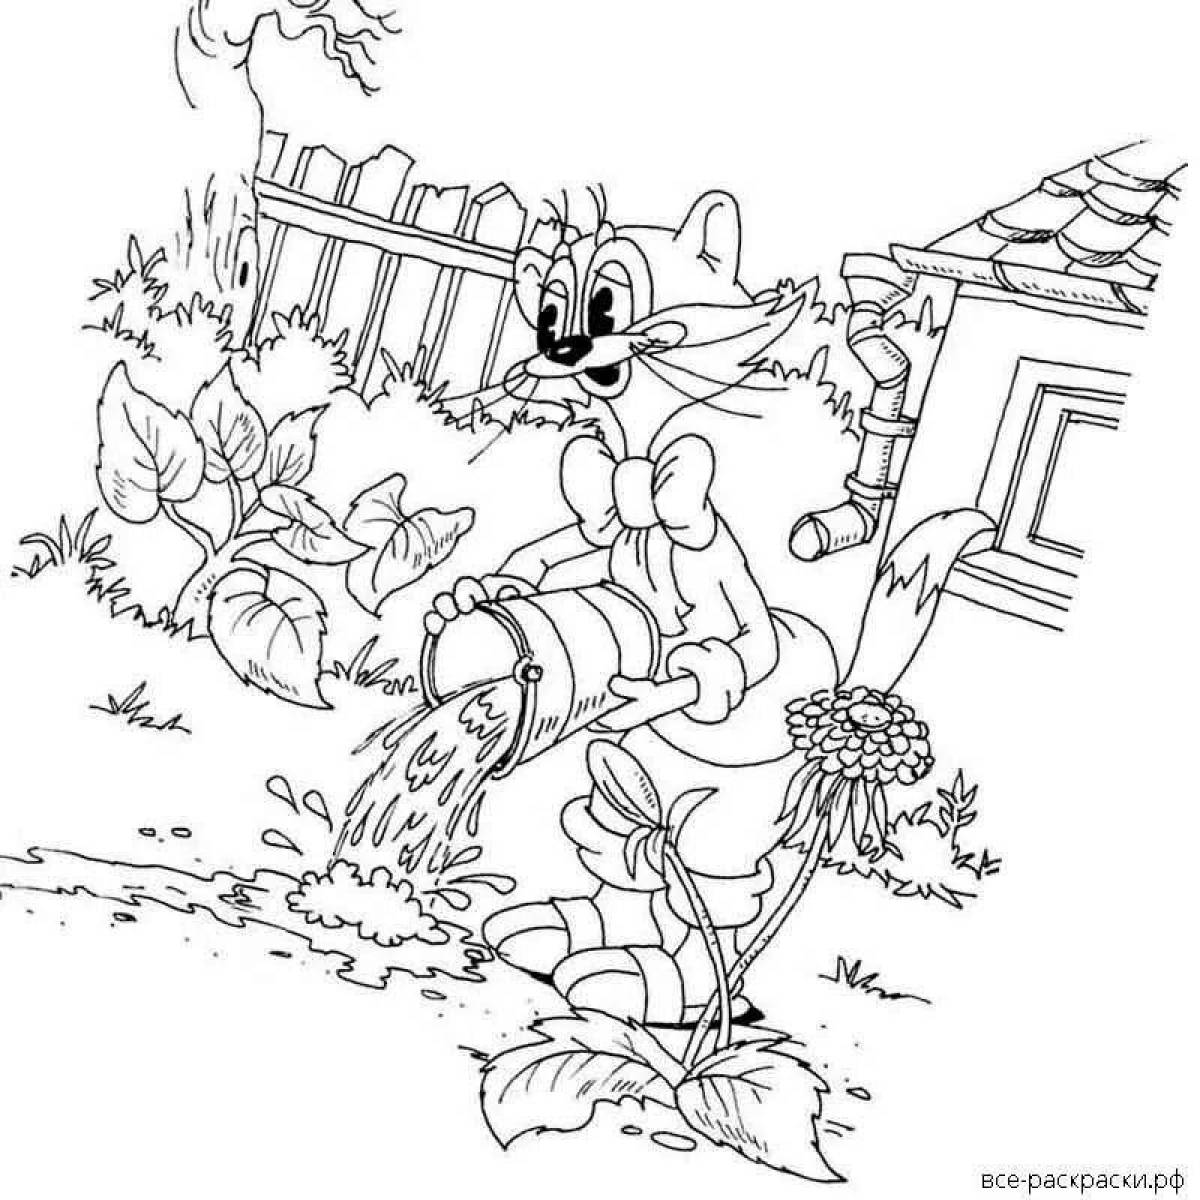 Colourful leopold cat coloring page